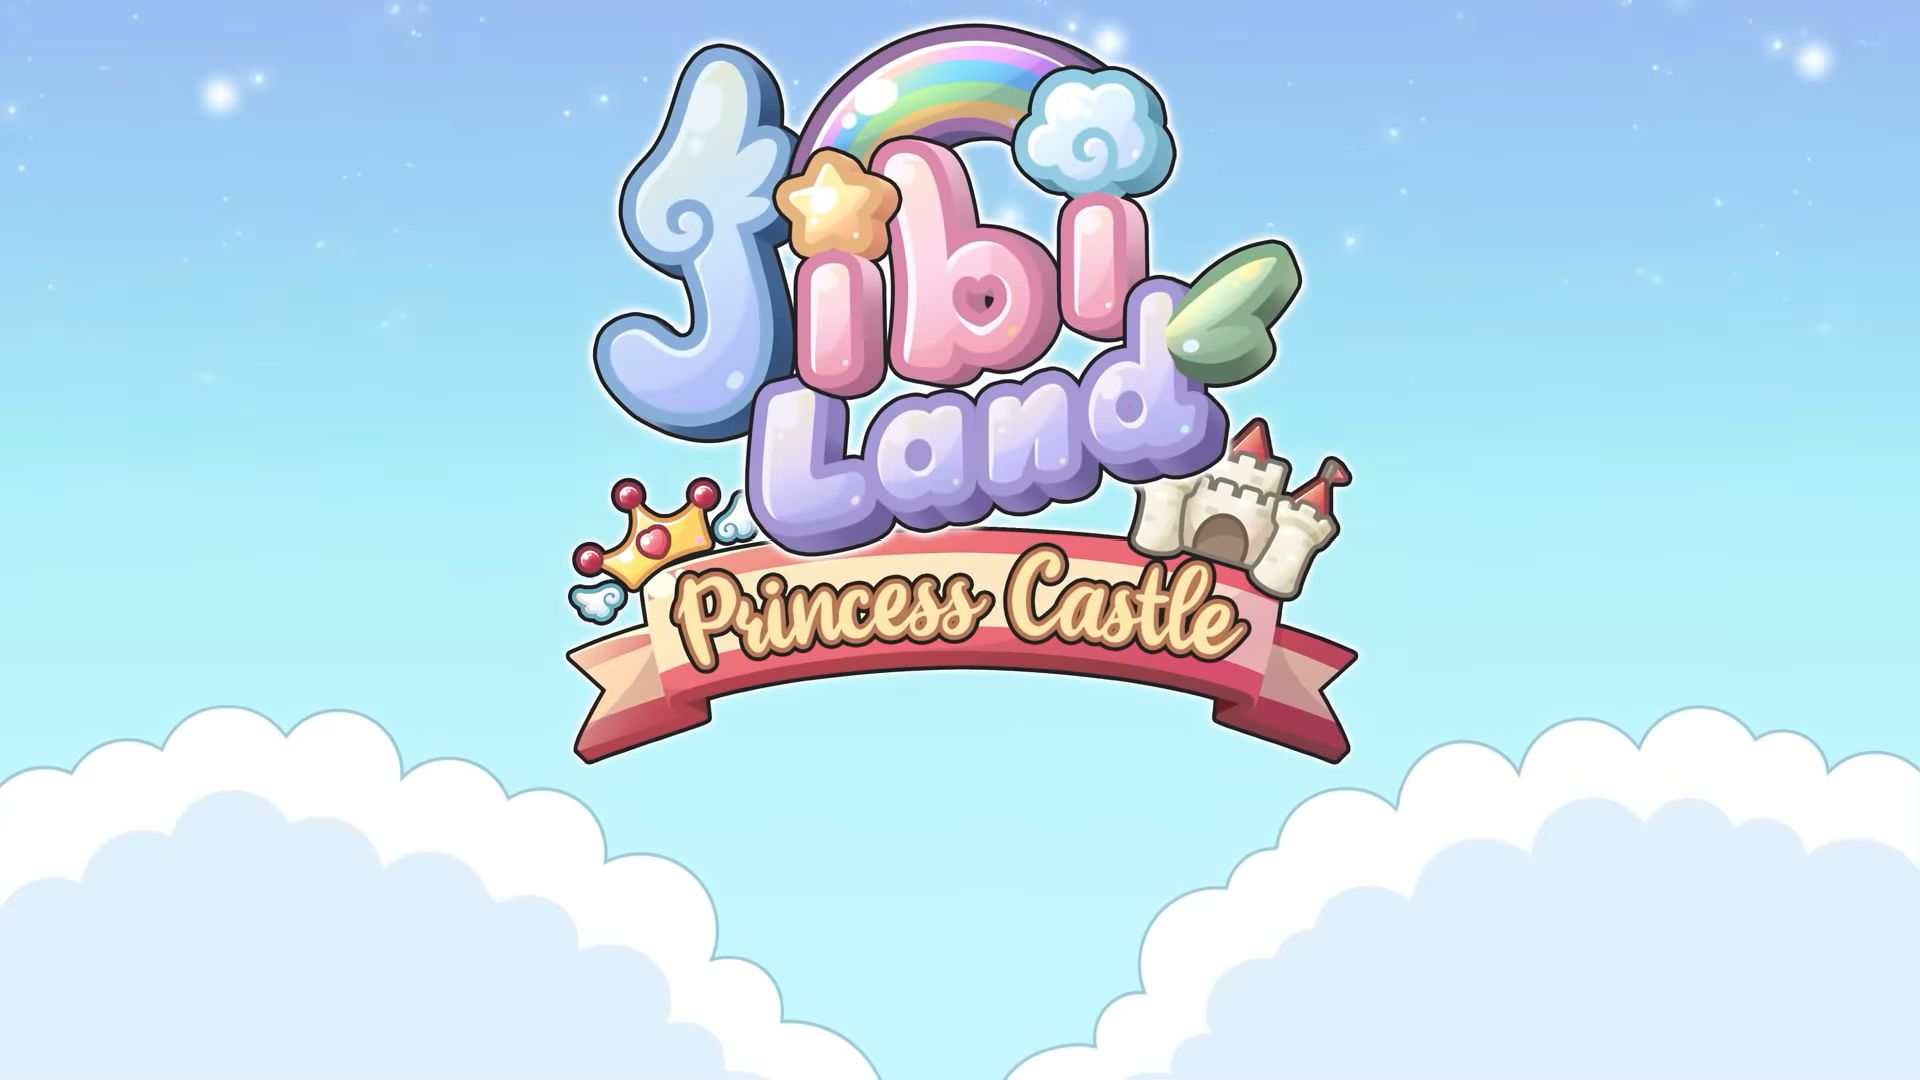 Jibi Land : Princess Castle for Android